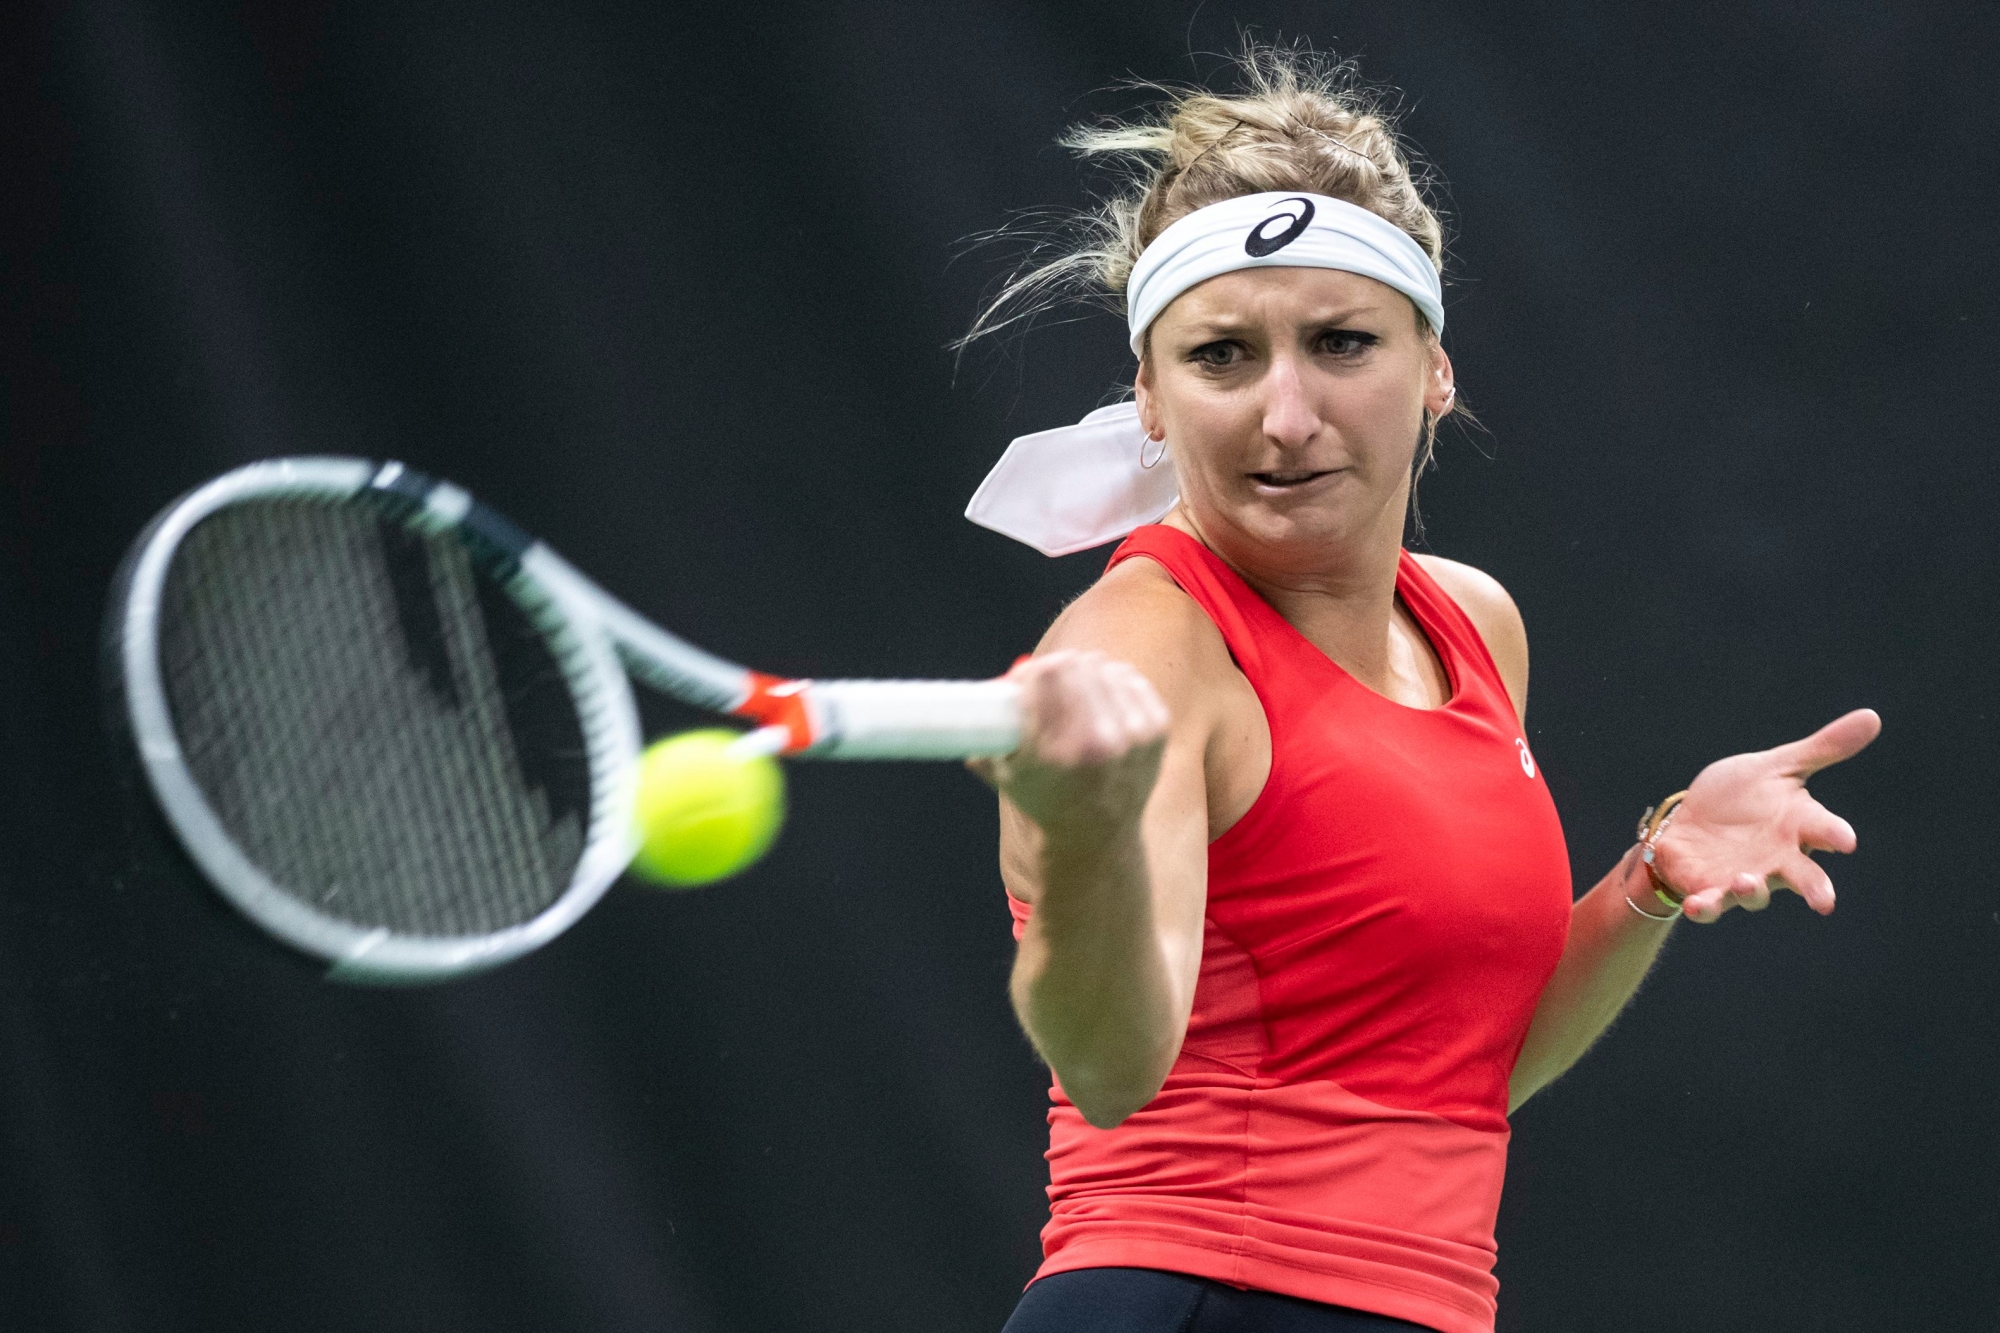 Switzerland's Timea Bacsinszky, in action during a training session prior to the Fed Cup, World Group, 1st Round, in the Swiss Tennis Arena in Biel, Switzerland, Wednesday, February 6, 2019. Switzerland will face Italy in the tennis Fed Cup. (KEYSTONE/Adrien Perritaz) SWITZERLAND ITALY TENNIS FED CUP